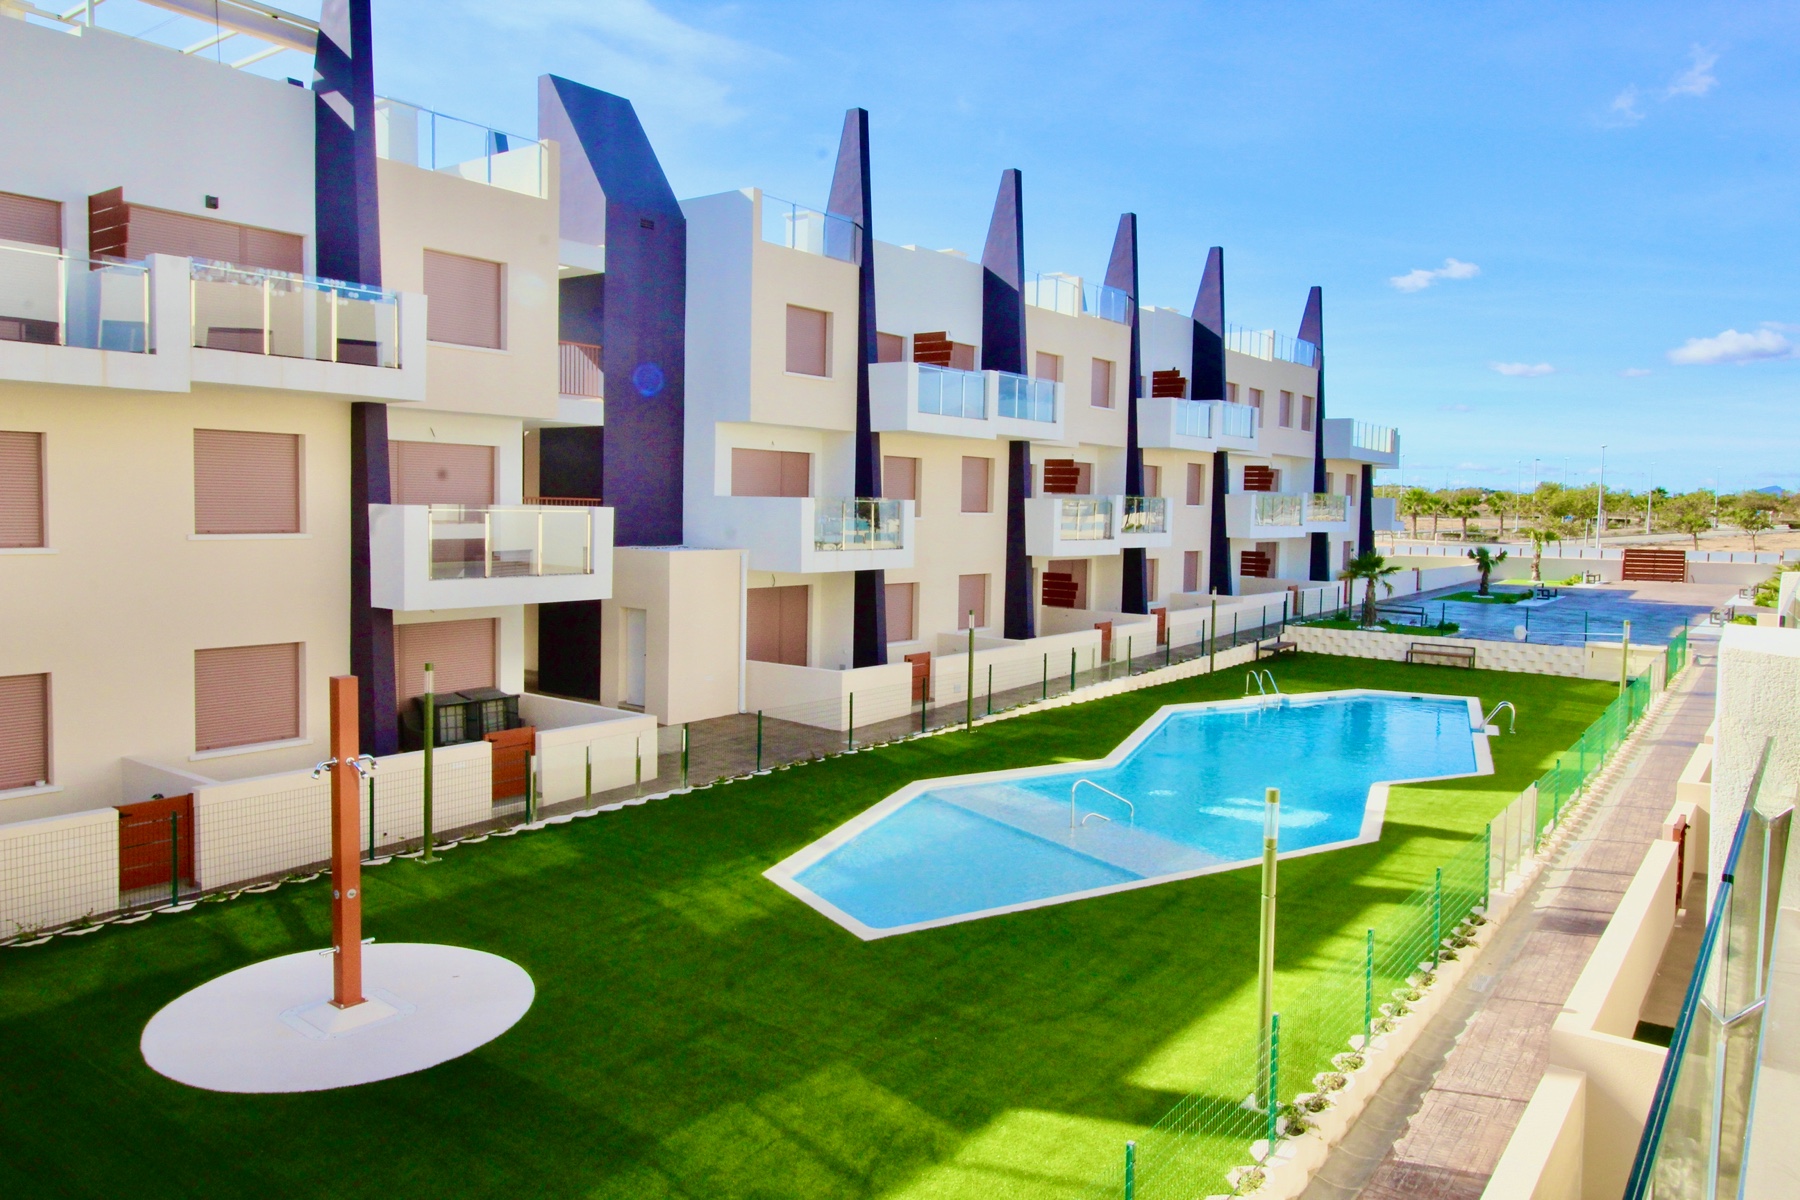 2 bedroom apartment / flat for sale in Mil Palmeras, Costa Blanca